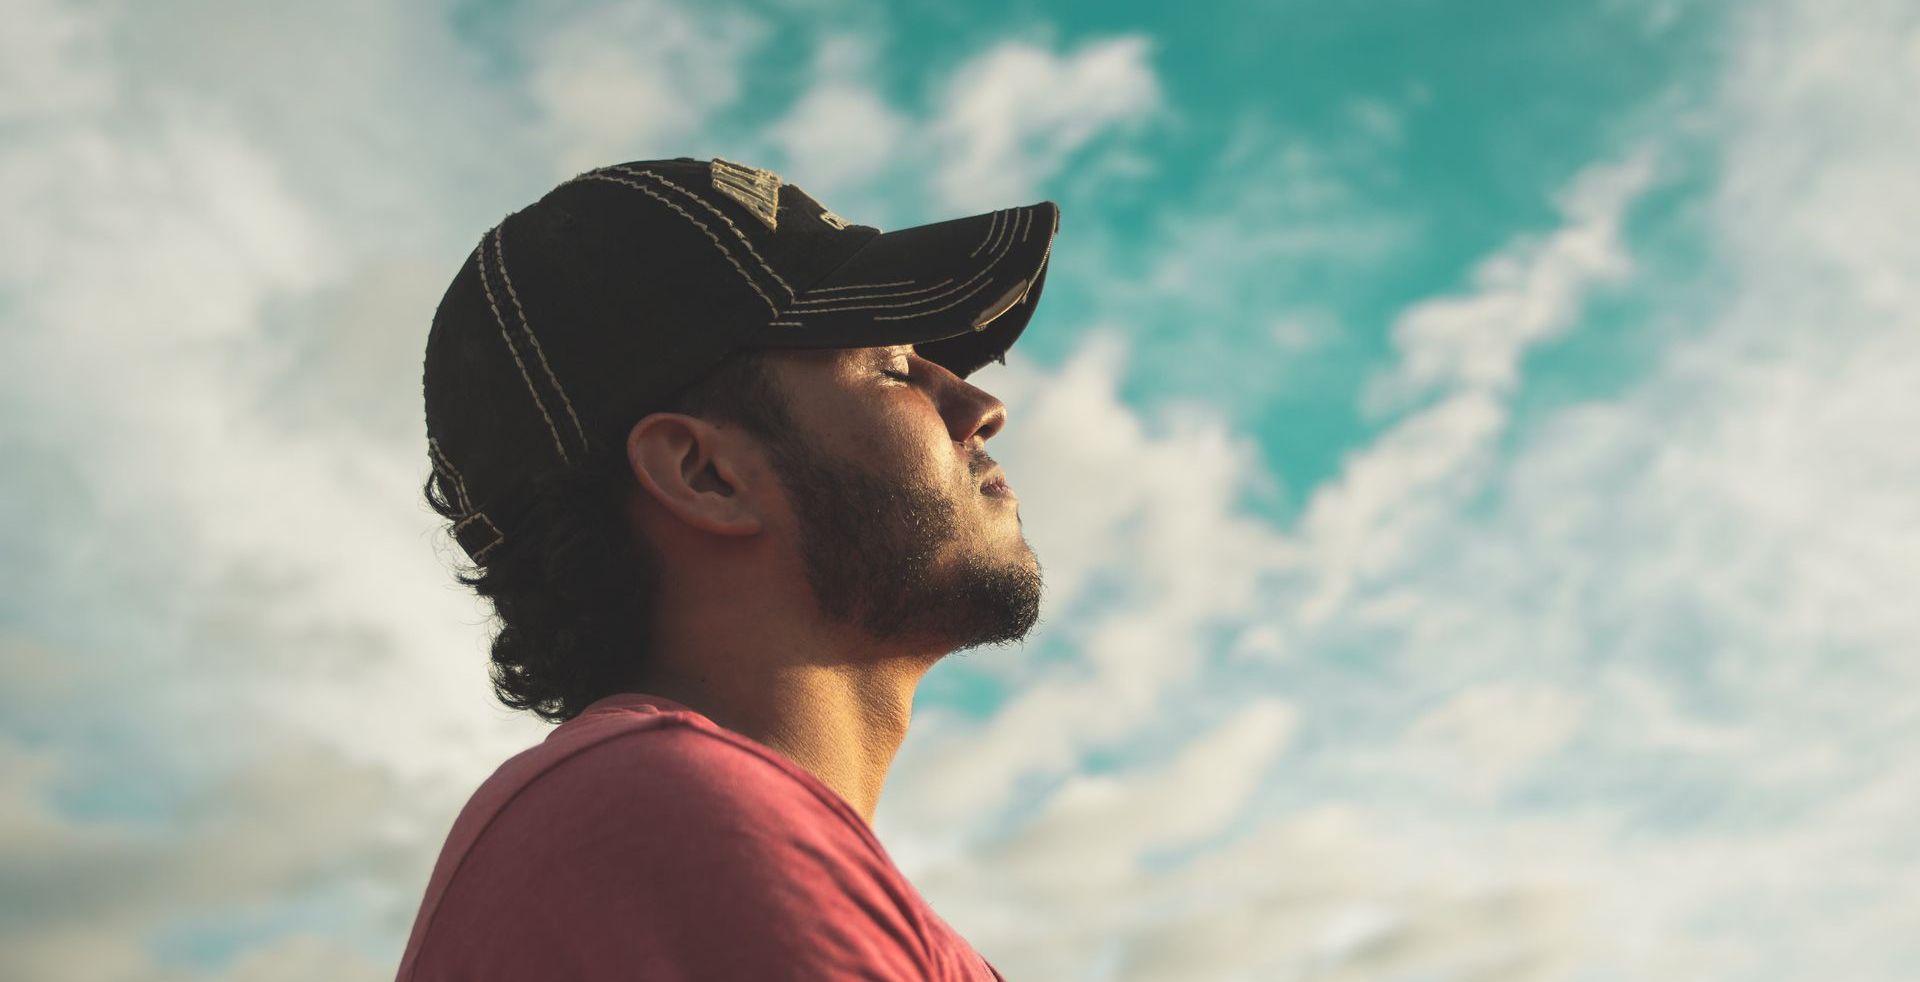 a man wearing a baseball cap is looking up at the sky.